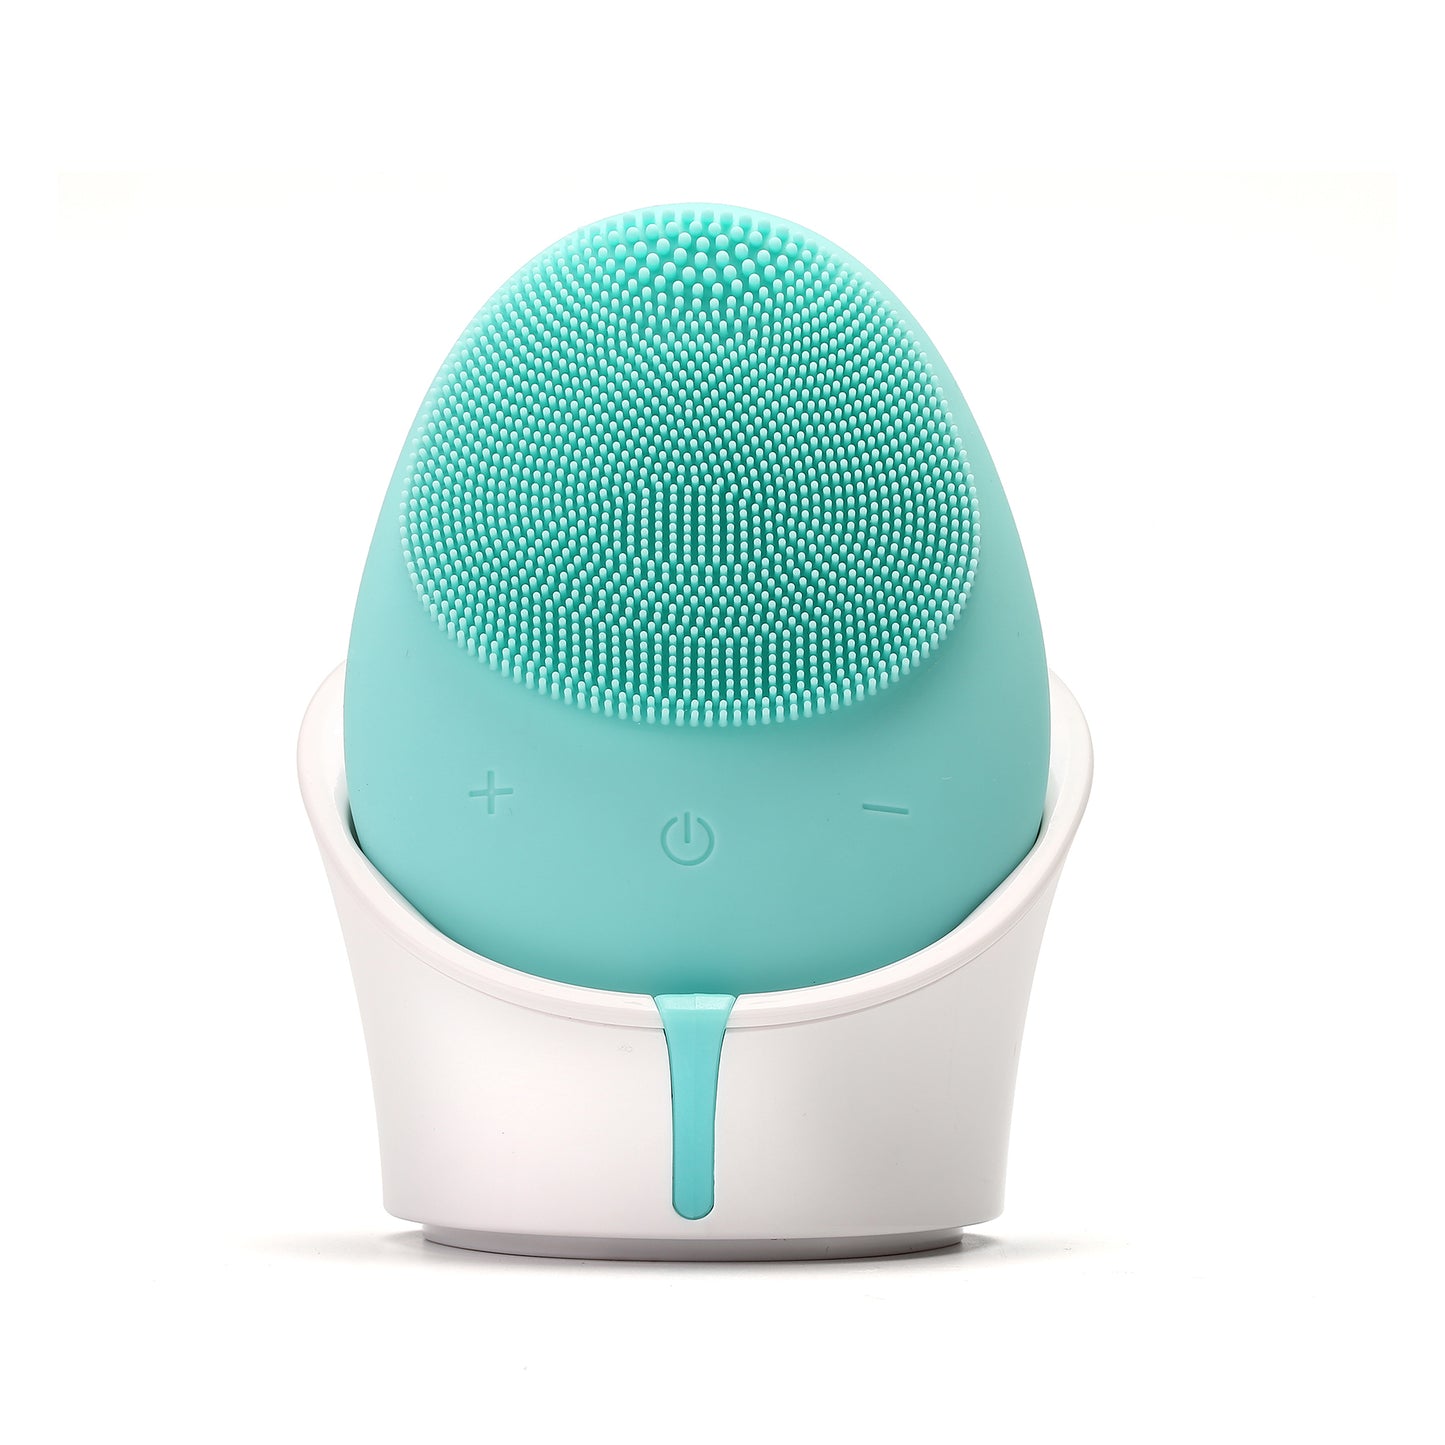 My Dermatician Sonic Cleansing Brush Brush Teal